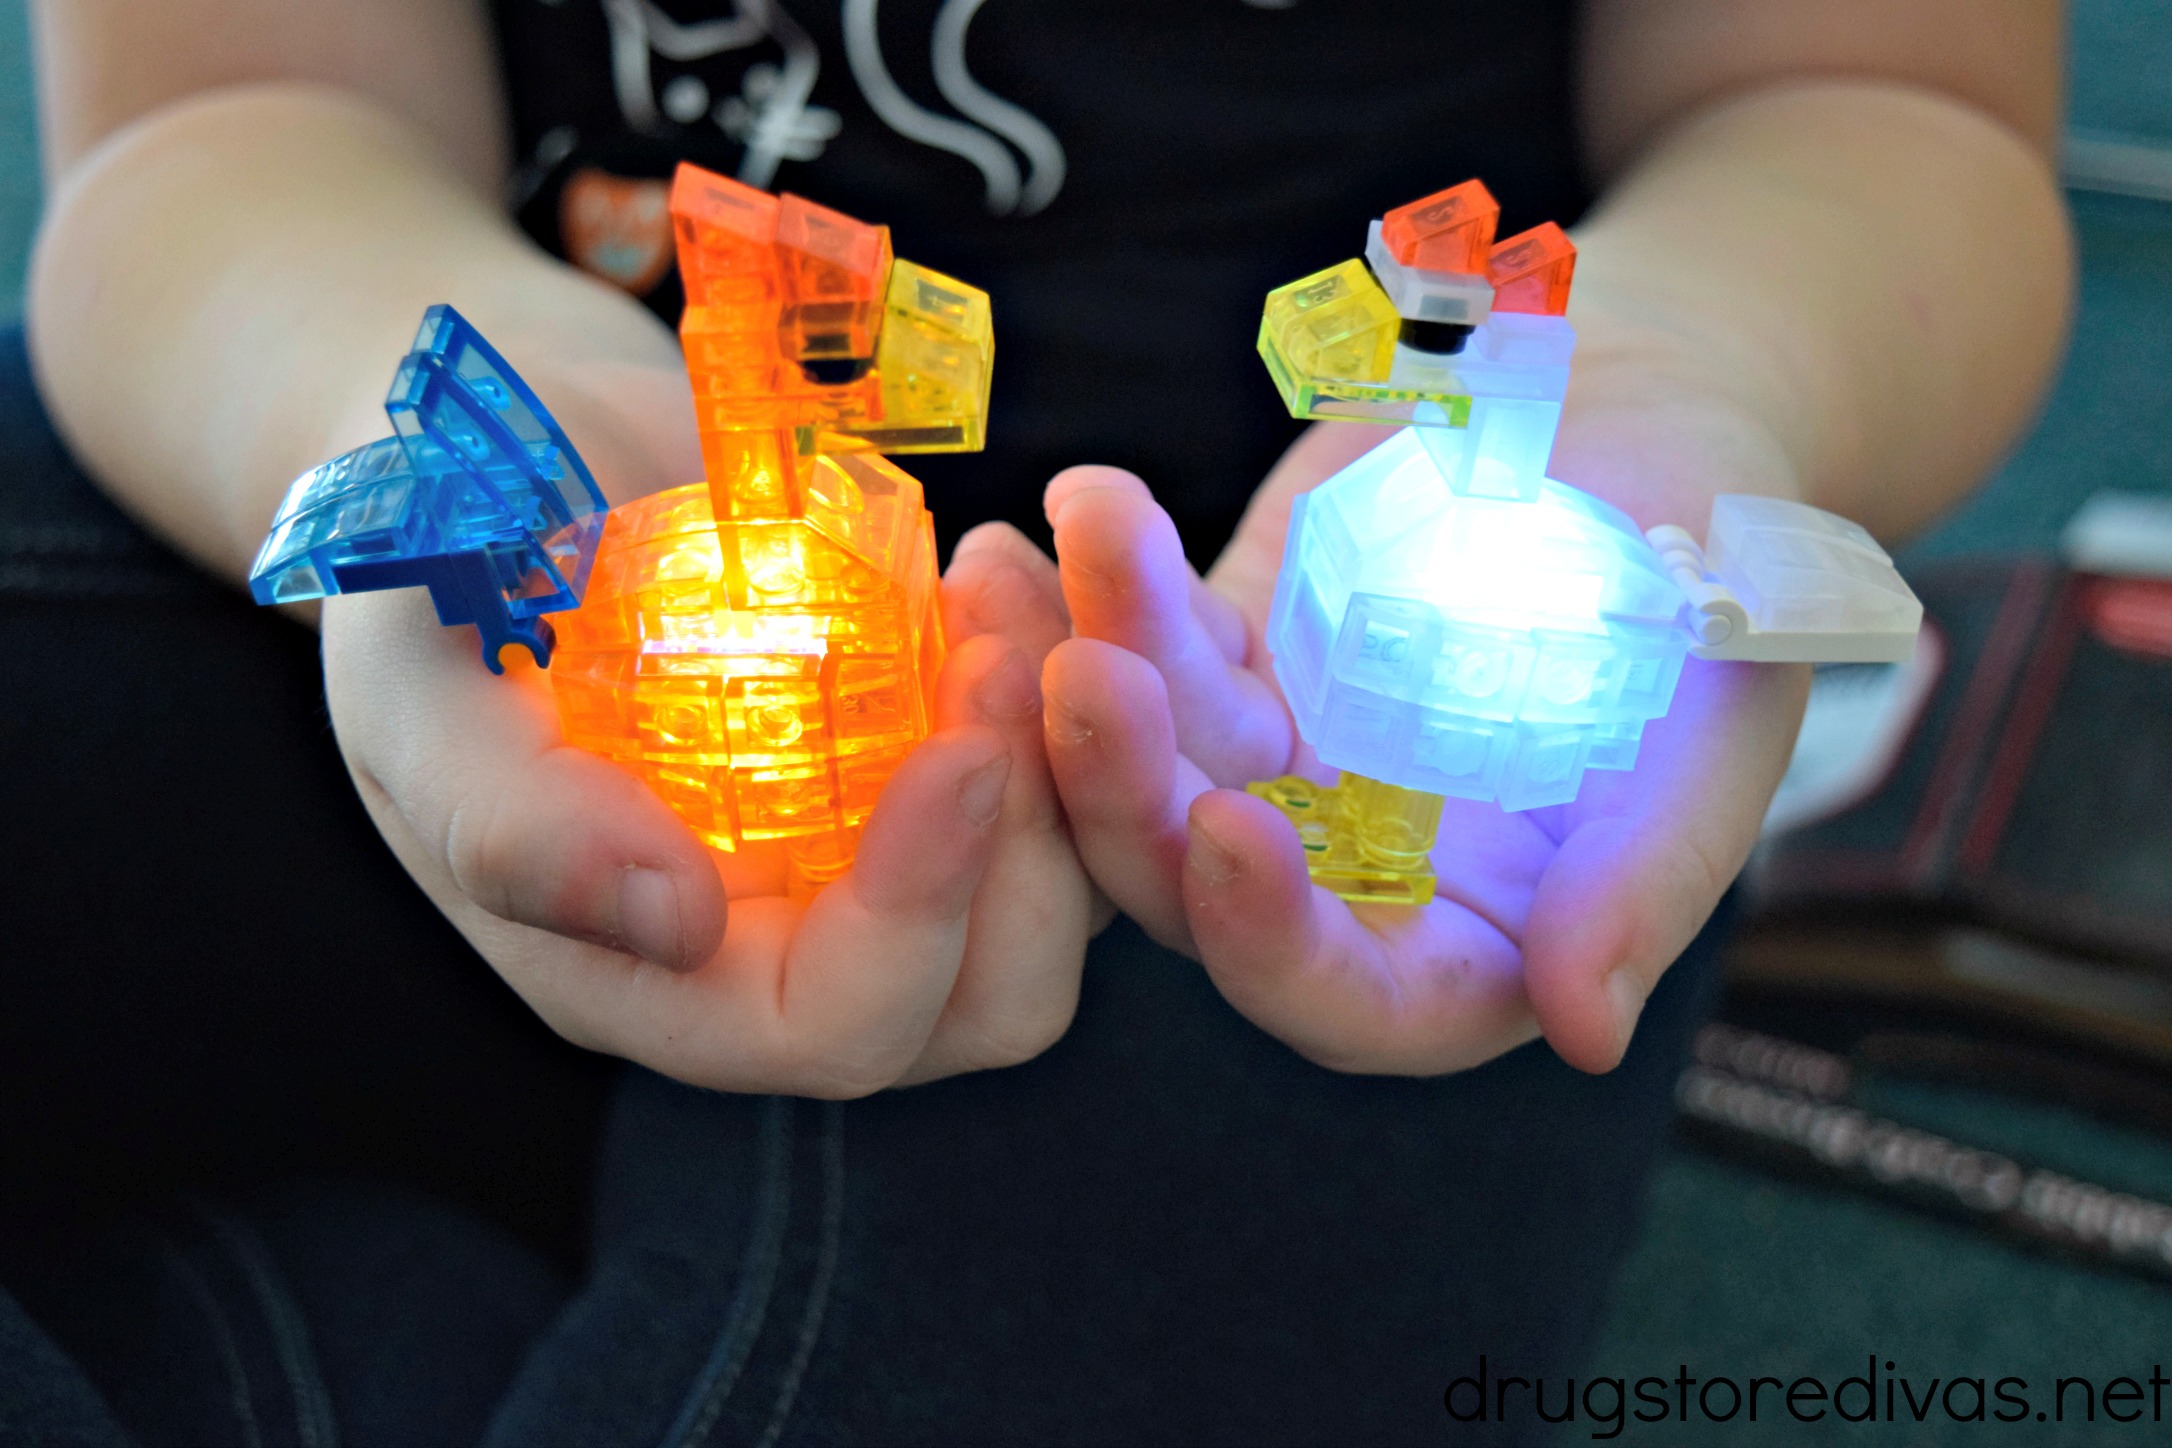 A young girl holding two light up building toys in the shape of a rooster and chicken.